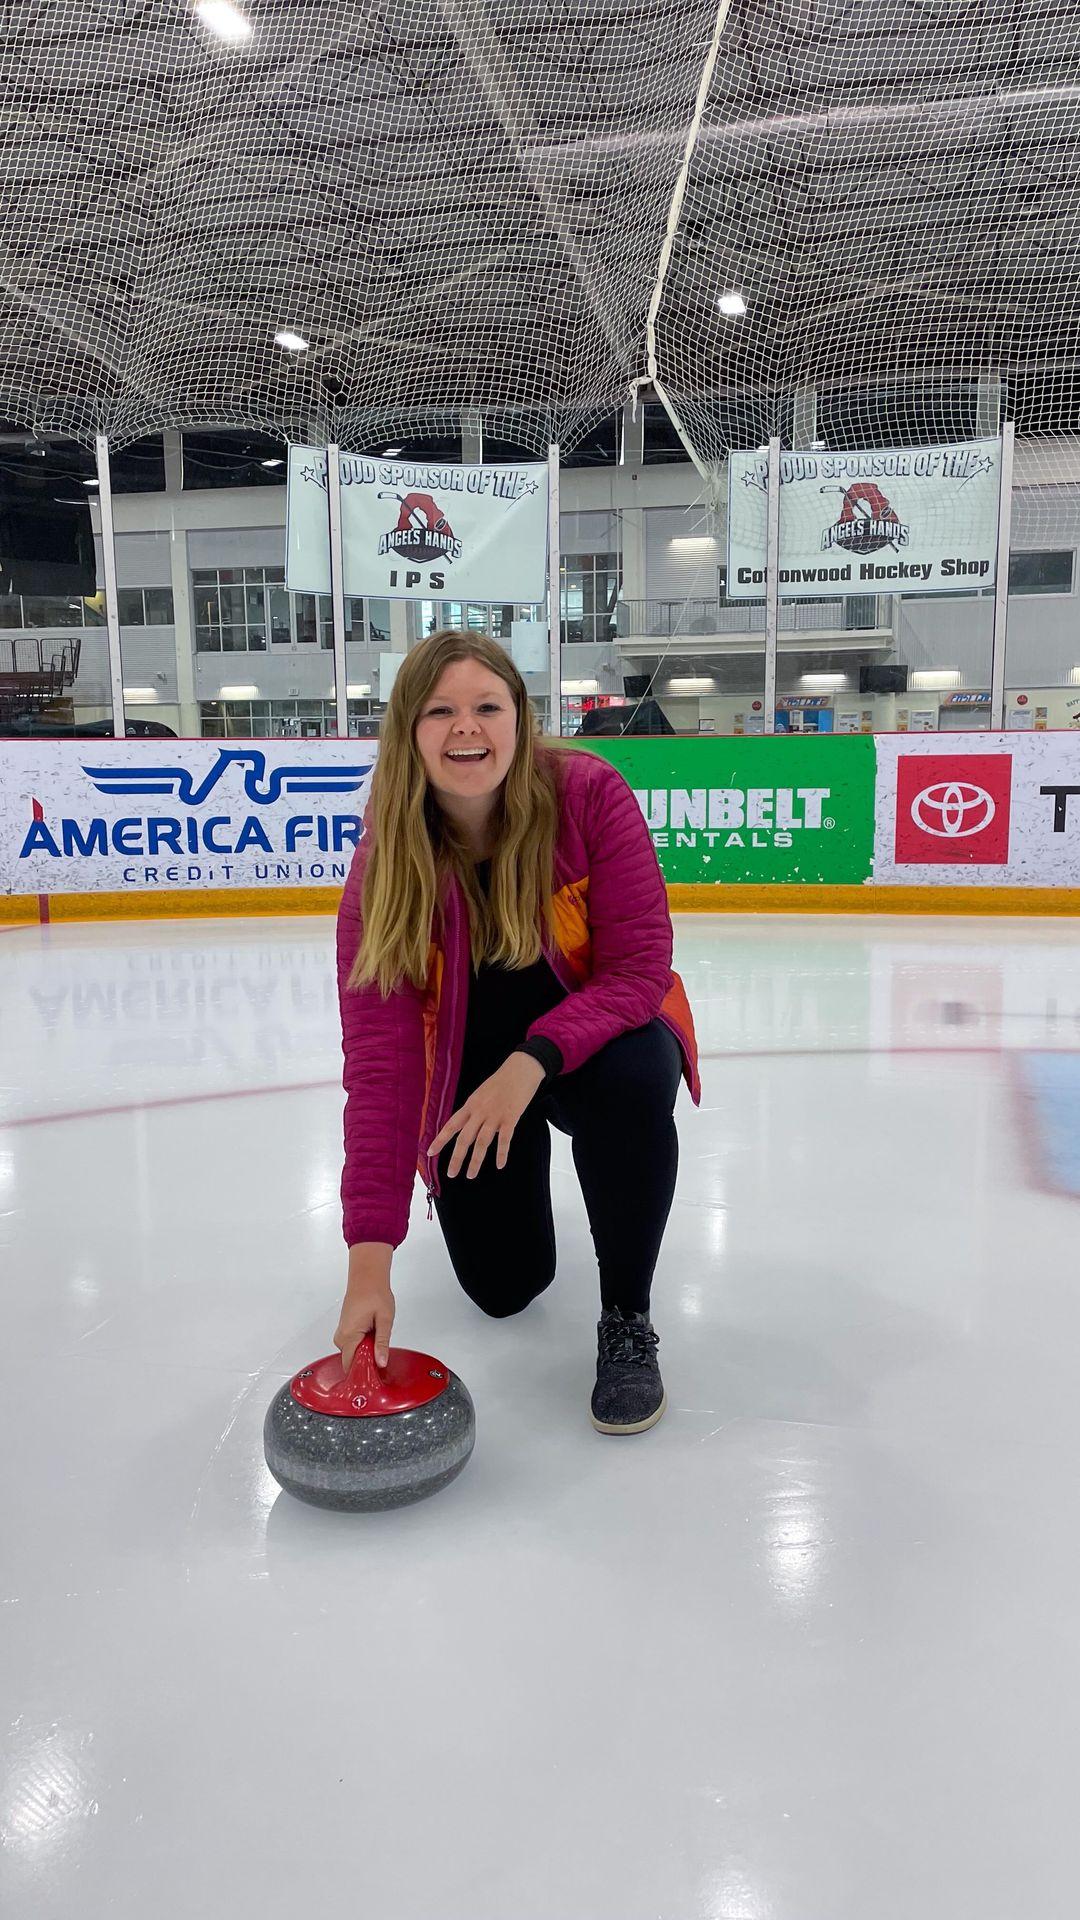 I tried something new at #WITSUtah - curling! 🥌